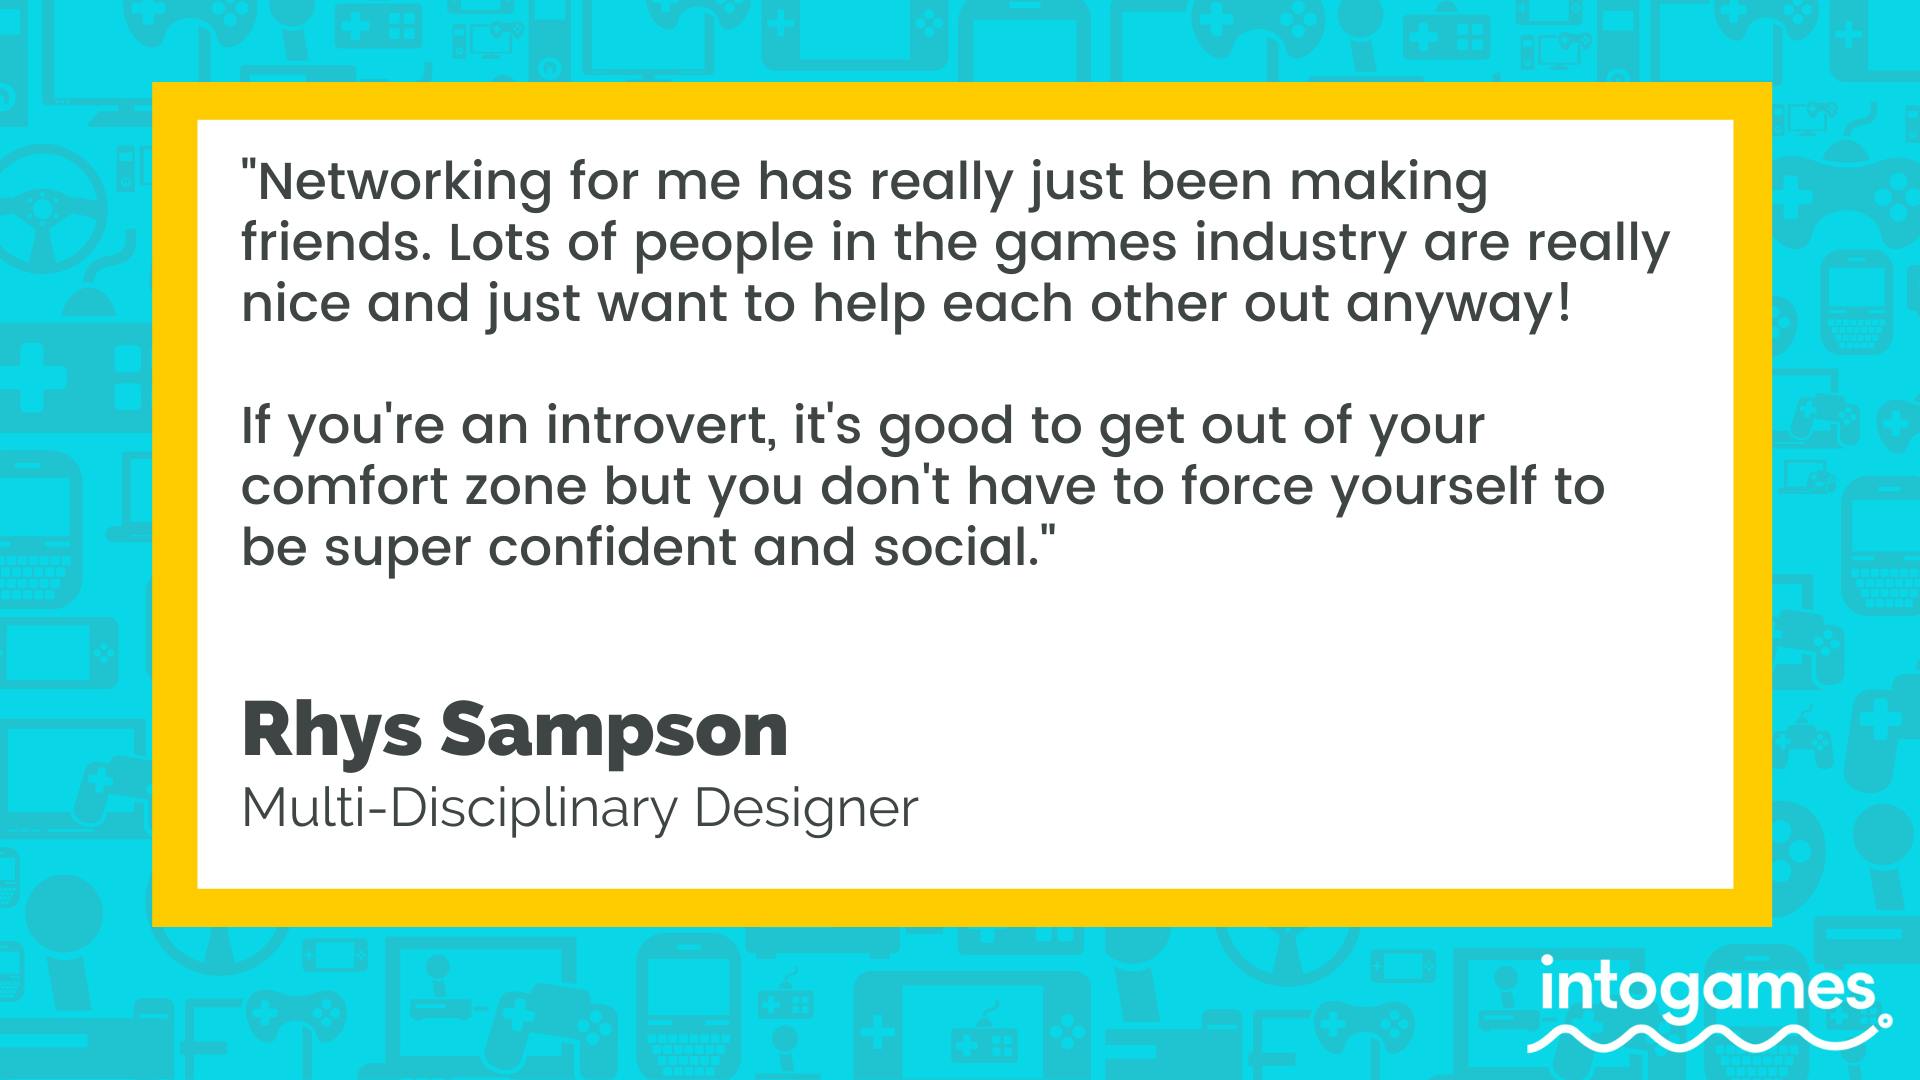 "Networking for me has really just been making friends. Lots of people in the games industry are really nice and just want to help each other out anyway! If you're an introvert, it's good to get out of your comfort zone but you don't have to force yourself to be super confident and social." - Rhys Sampson, Multi-Disciplinary Designer. 